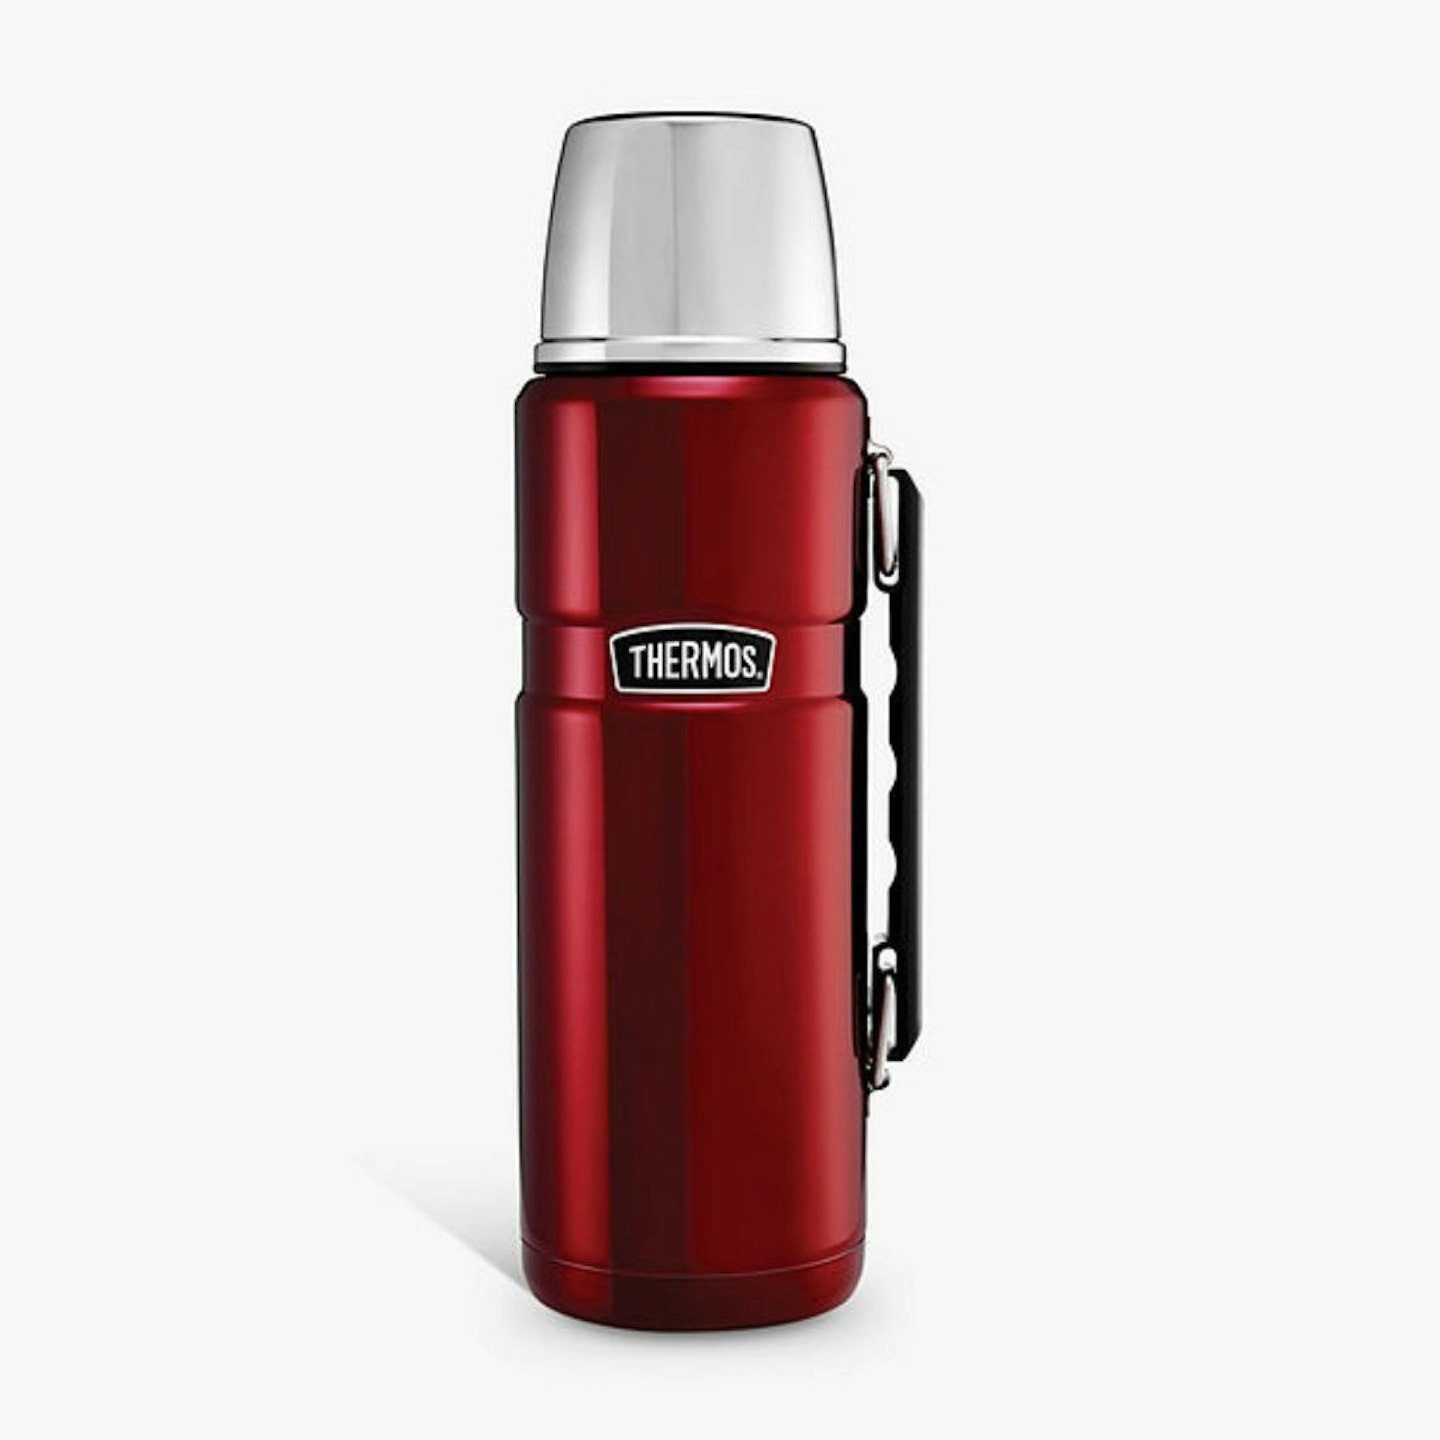 Best Christmas Gifts For Teachers:  Thermos Stainless Steel King Flask